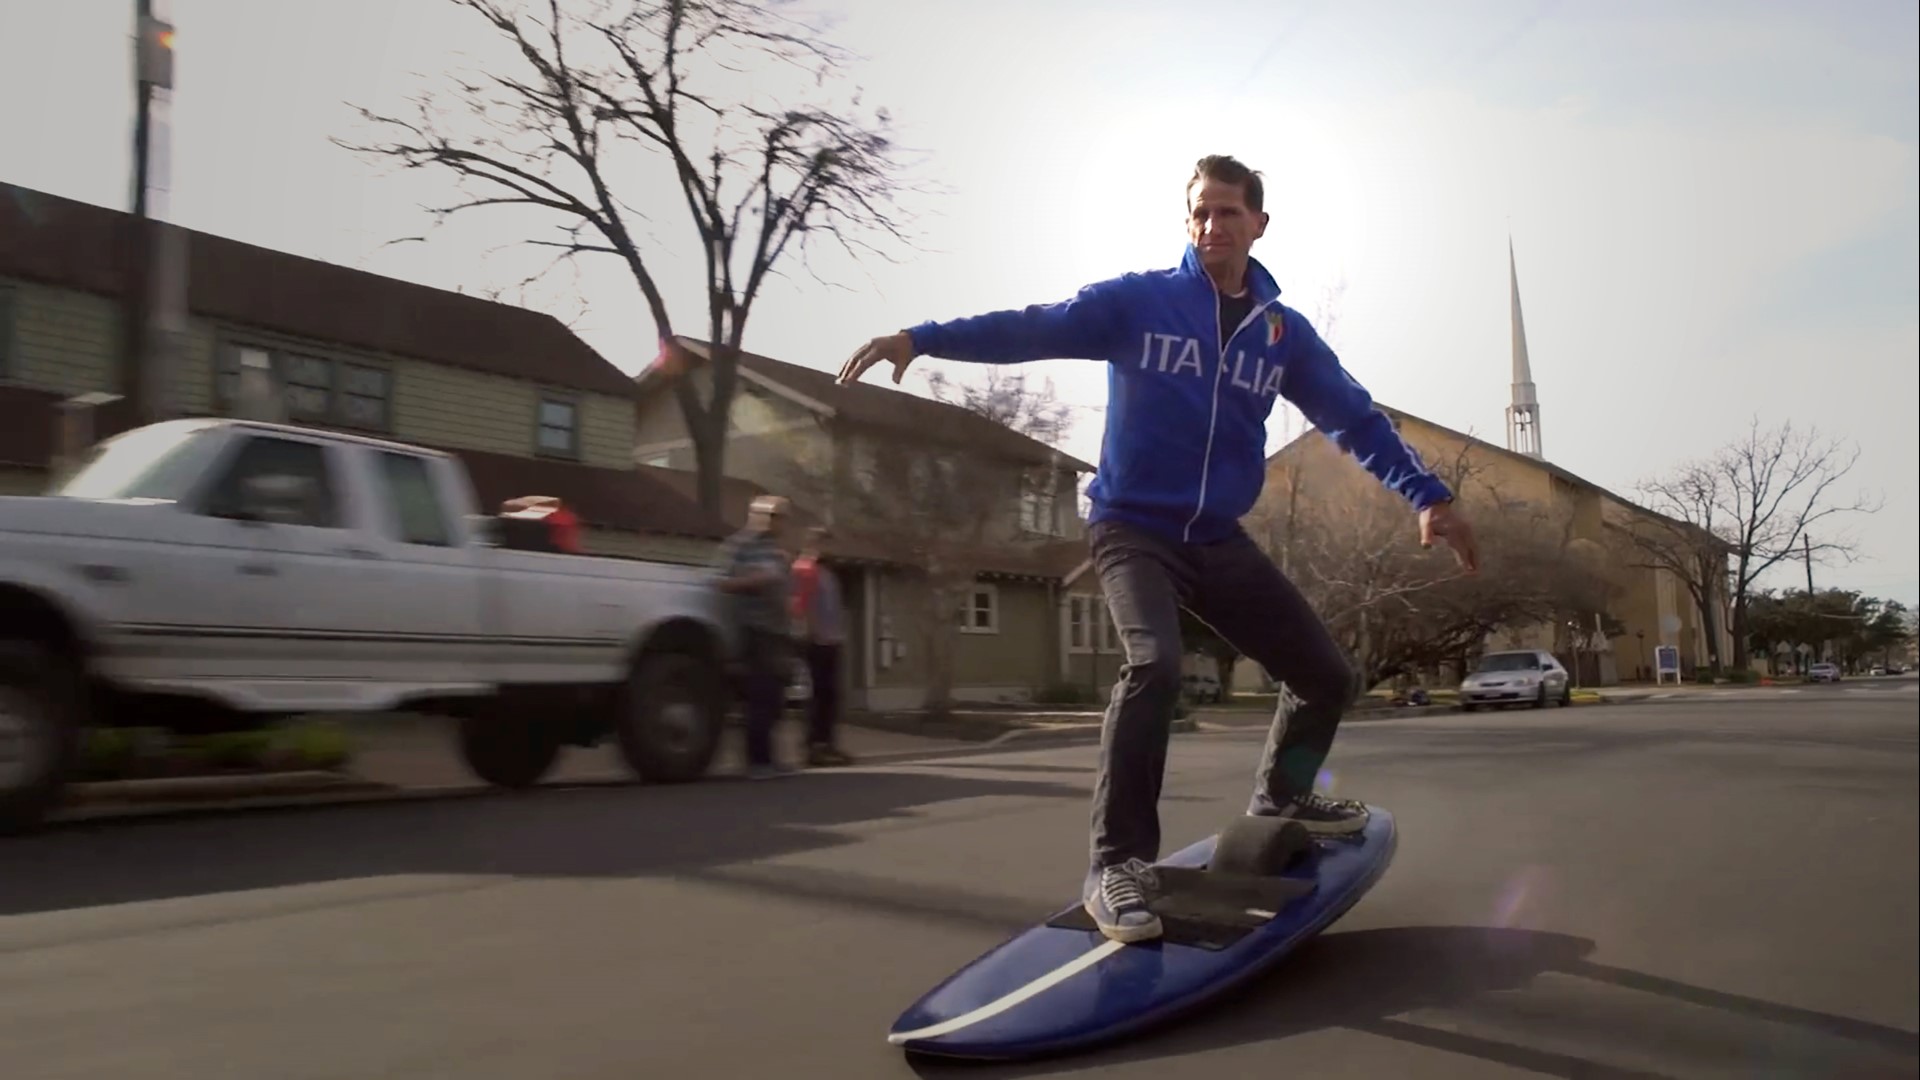 RodaSurf will hit the streets on March 14. (Video credit: RodaSurf)